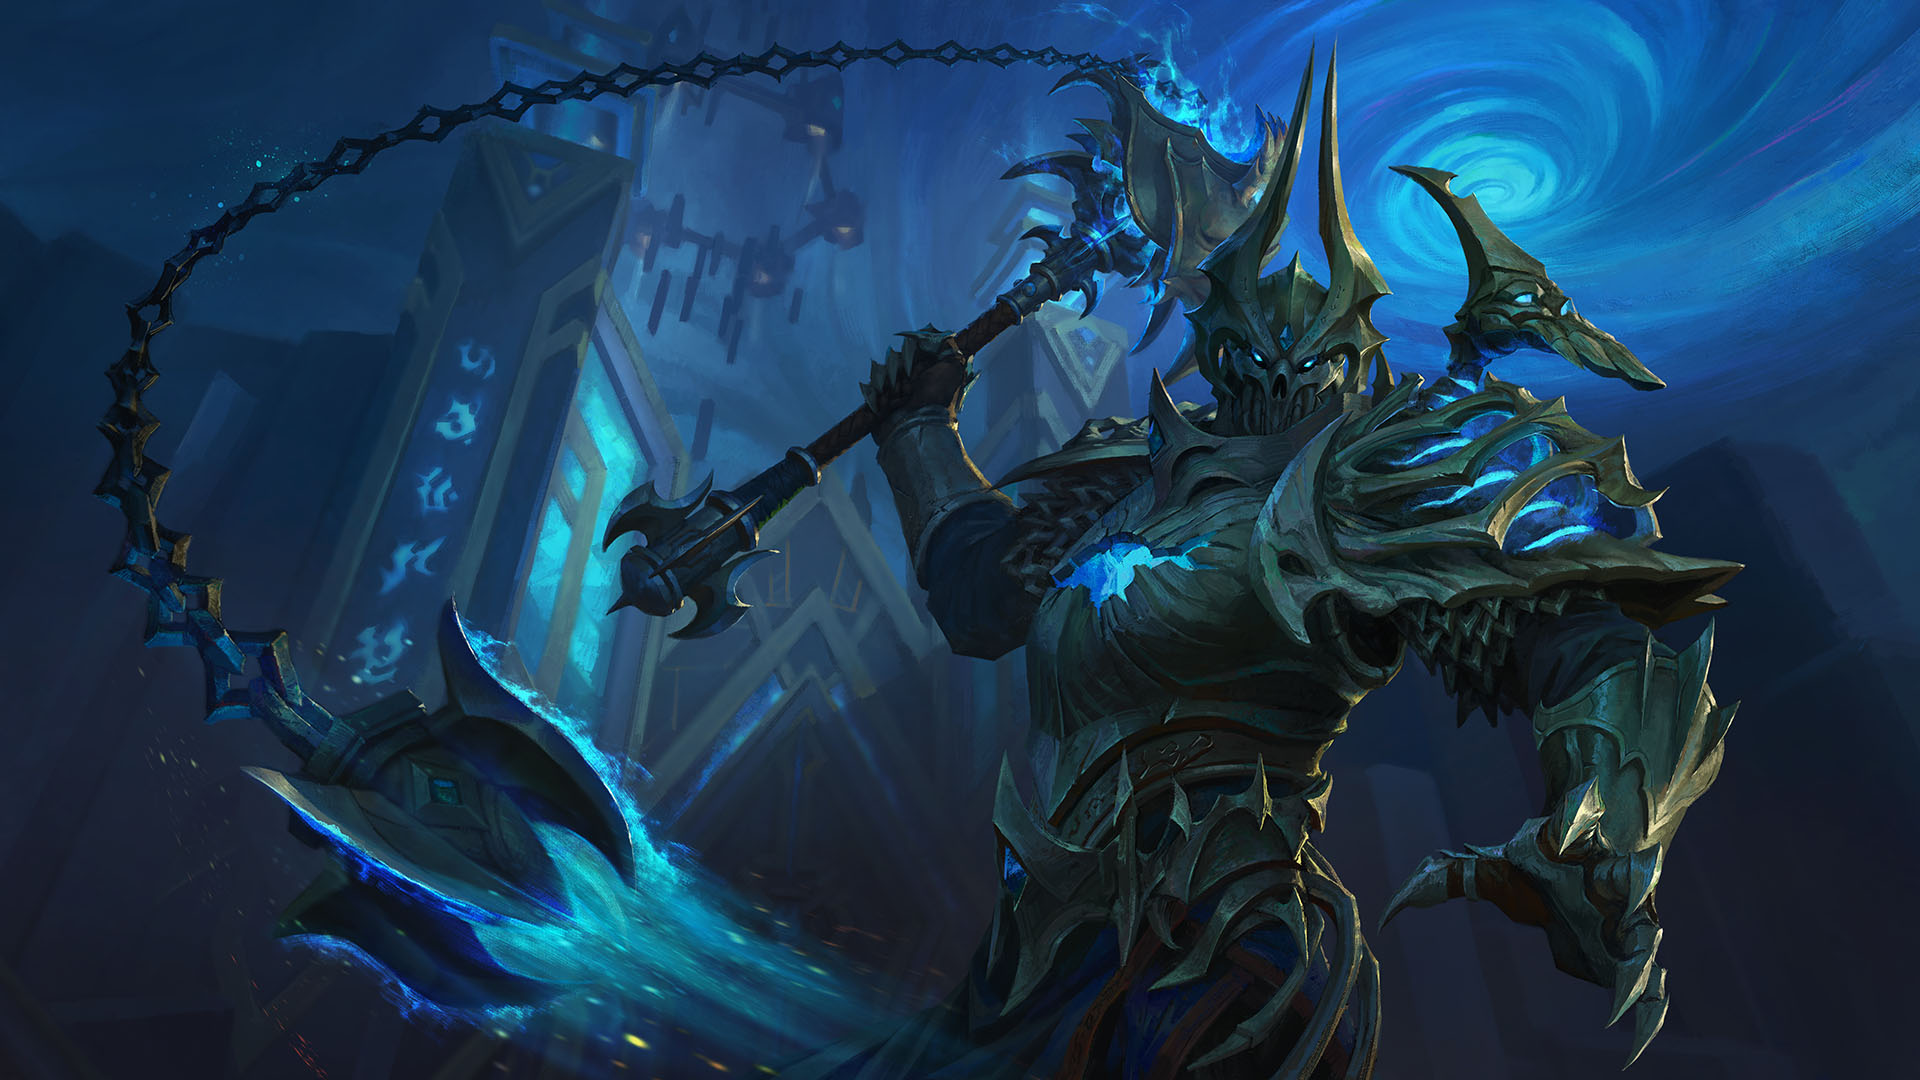 WoW expansion announcement time – watch the reveal here soon